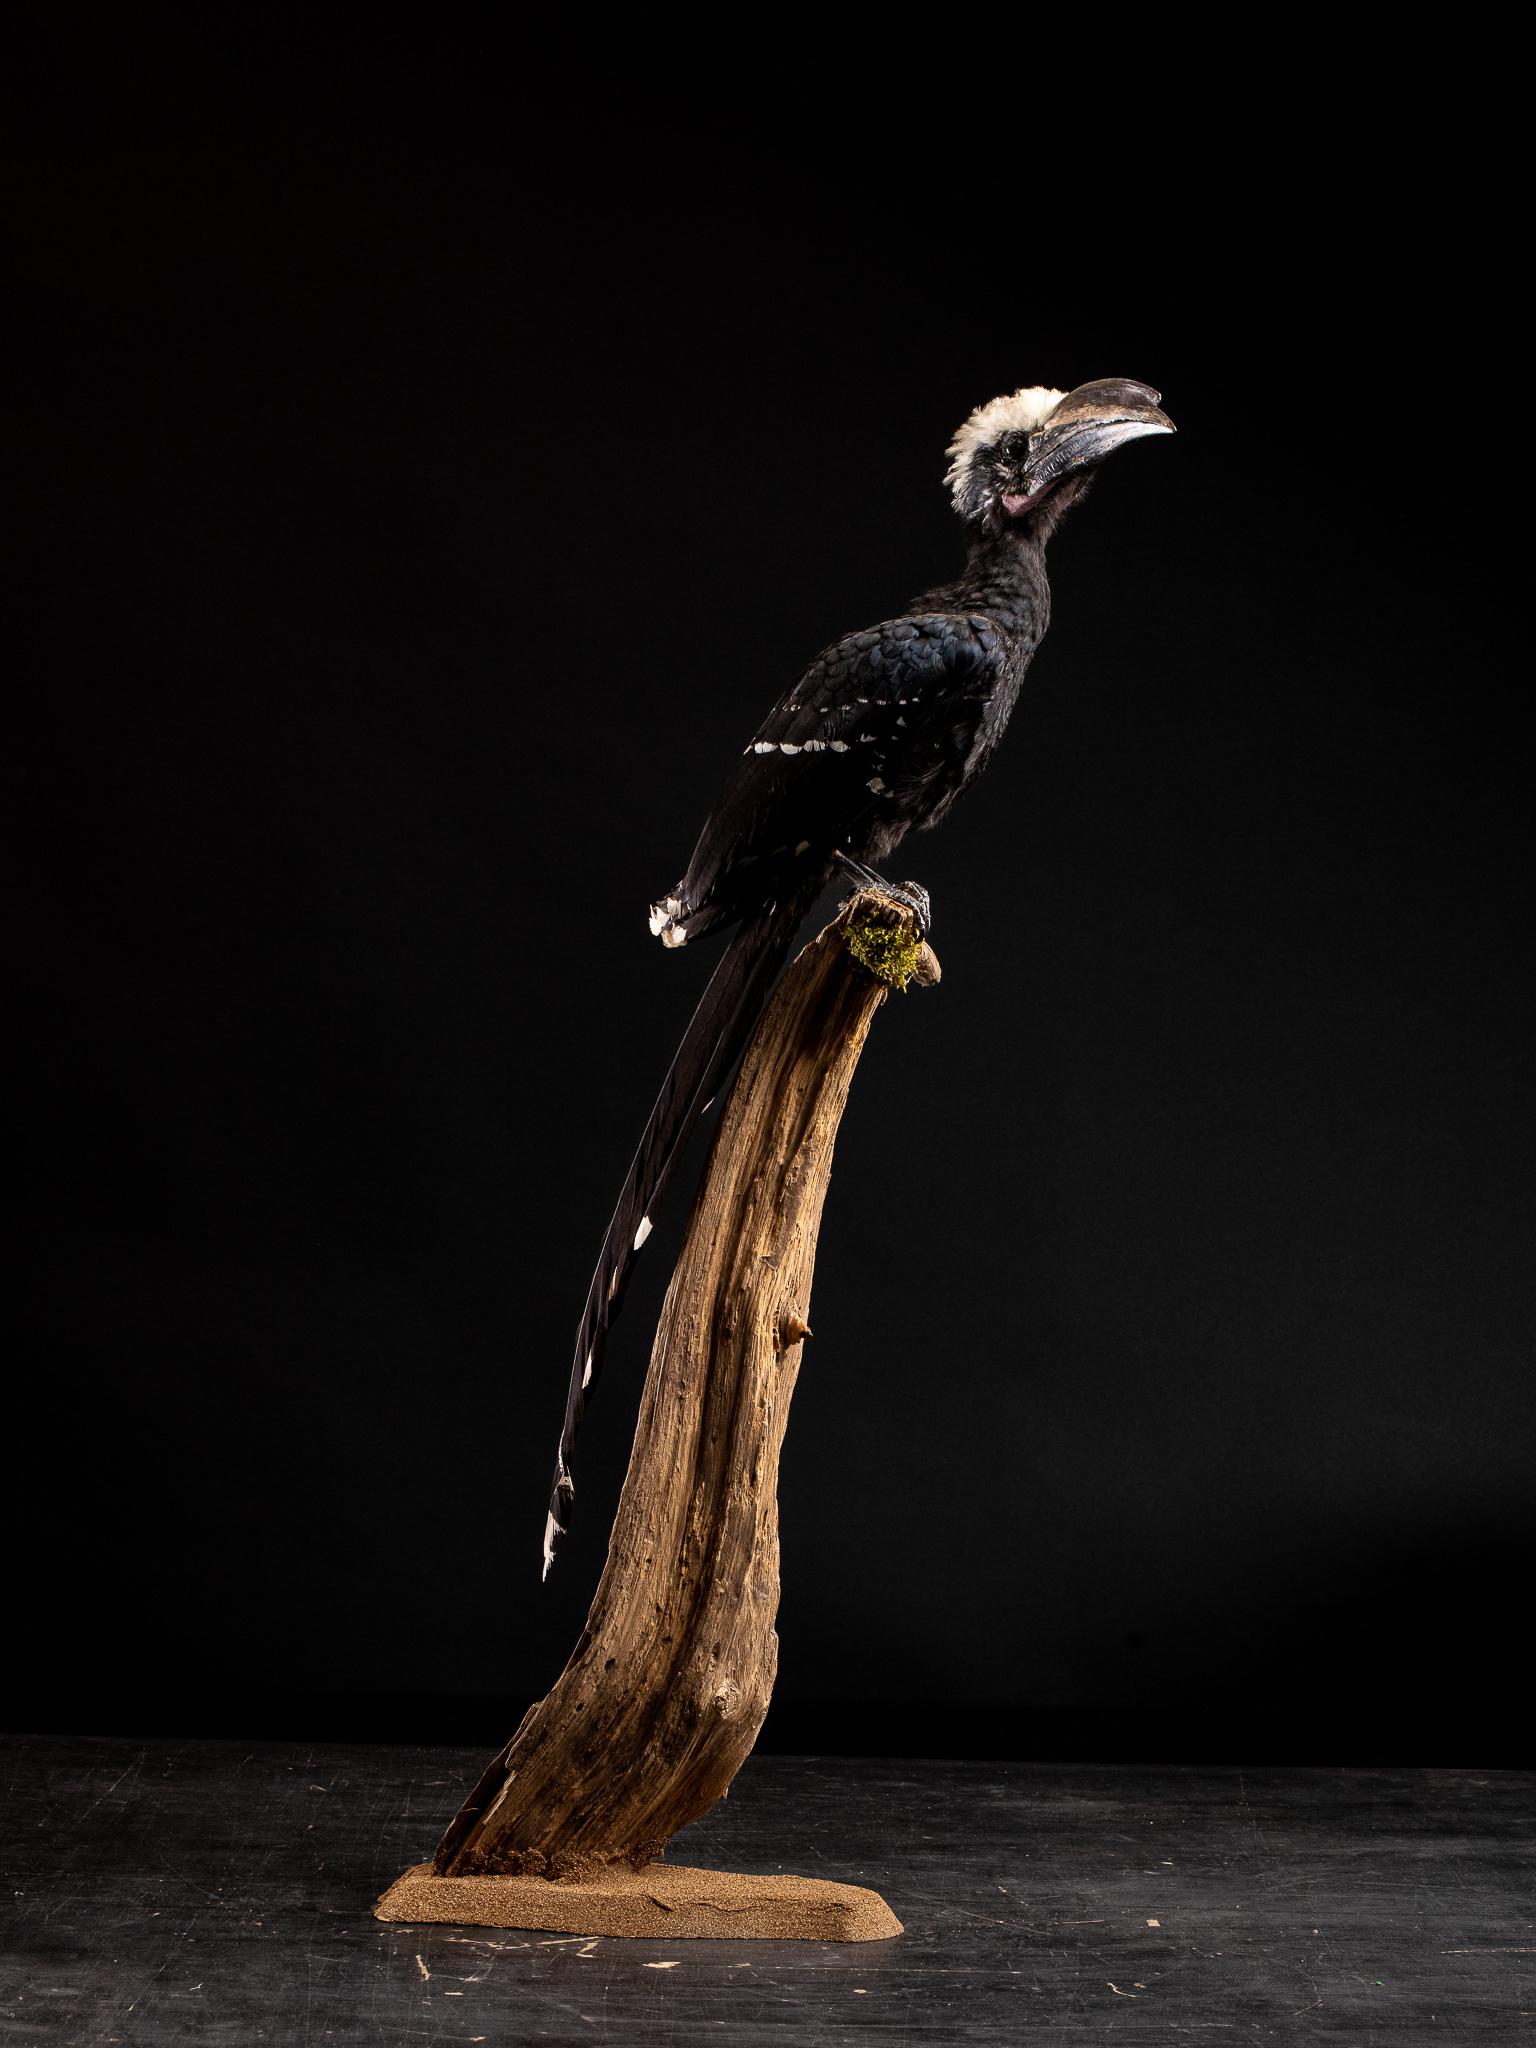 Hornbills are strange and beautiful birds, often incorporated in local cultures. In Africa, they are respected by people and involved in mythology and folklores.
These birds are not Cites listed and are European bred-they originate from different